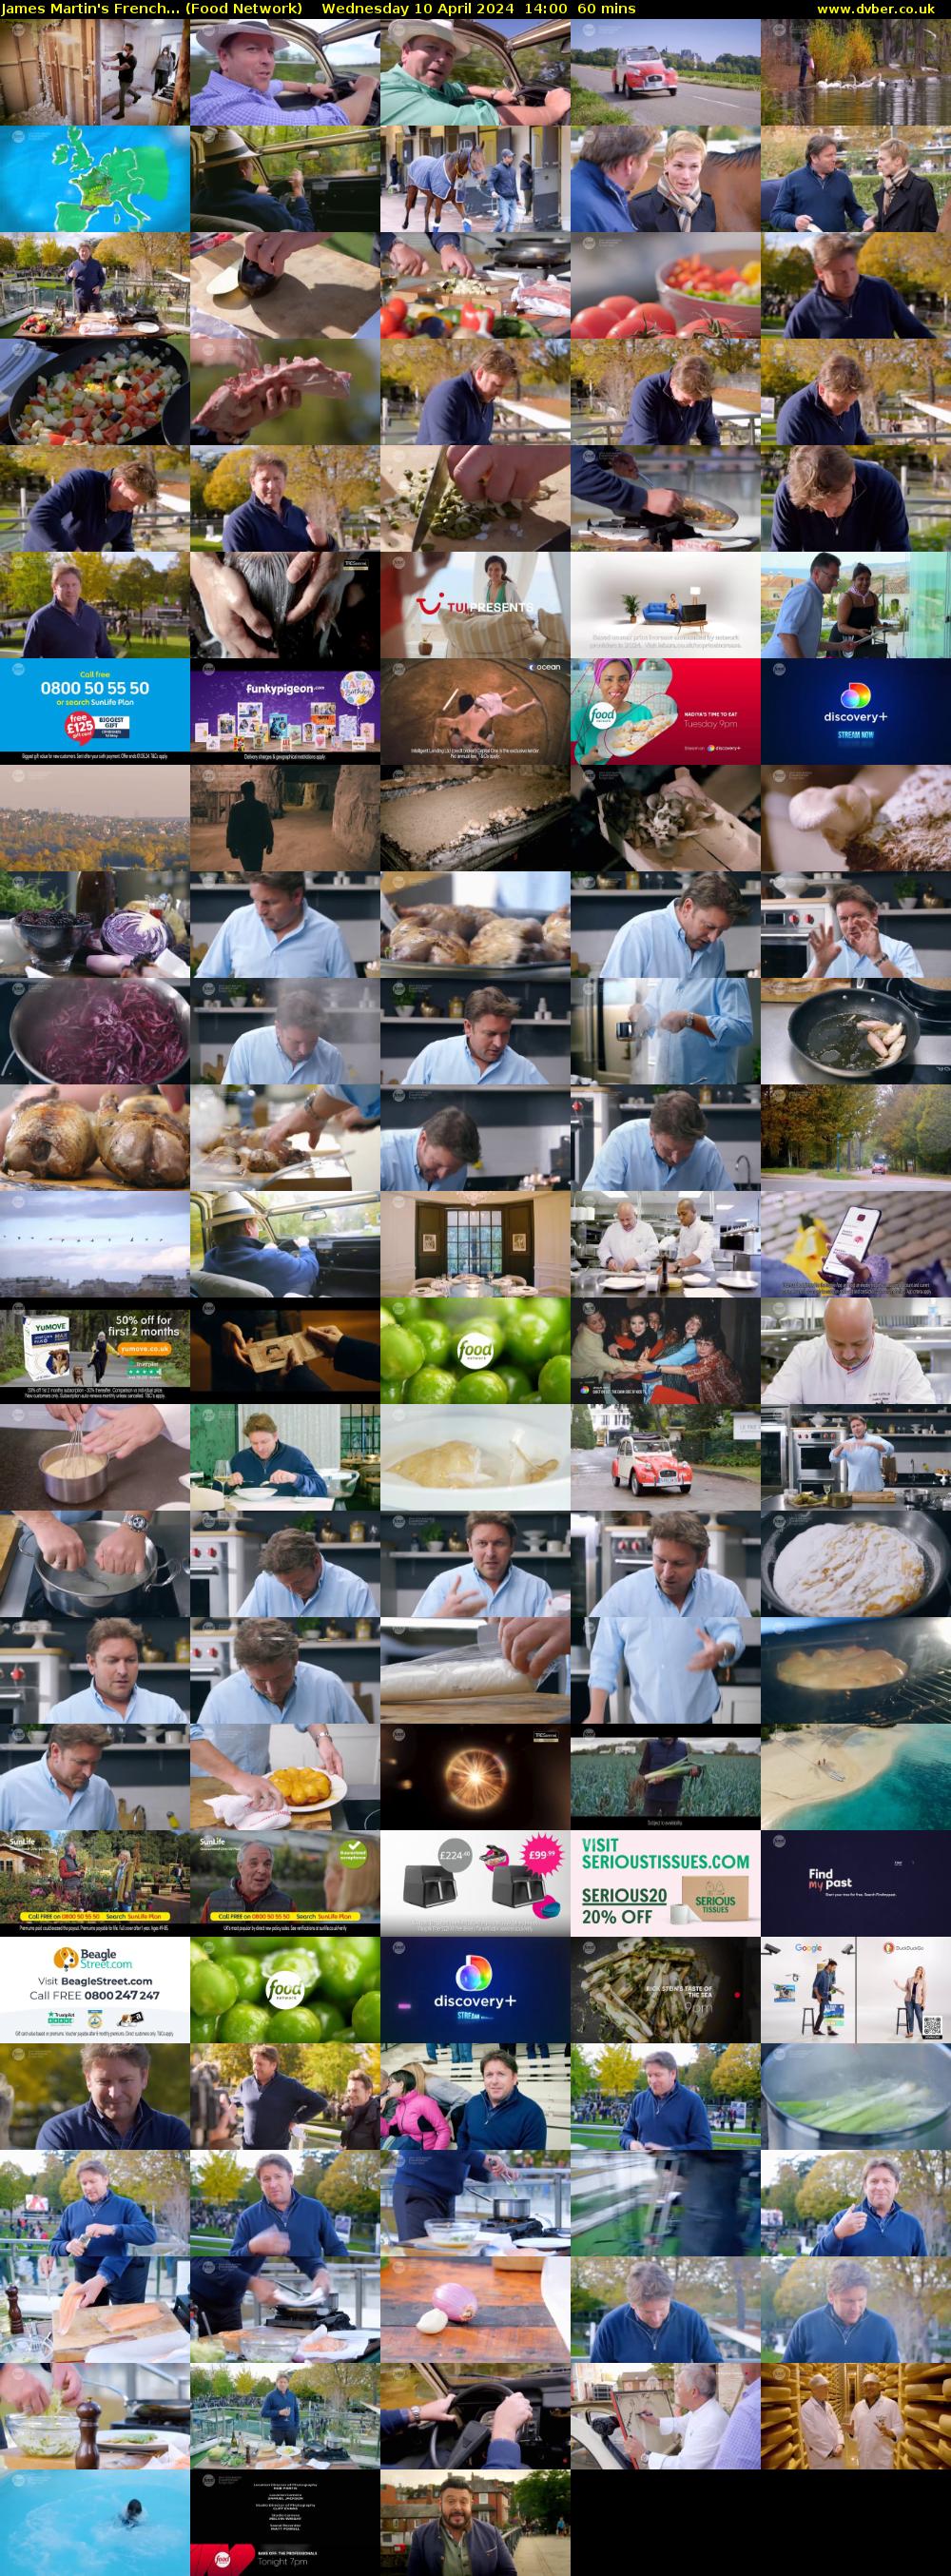 James Martin's French... (Food Network) Wednesday 10 April 2024 14:00 - 15:00